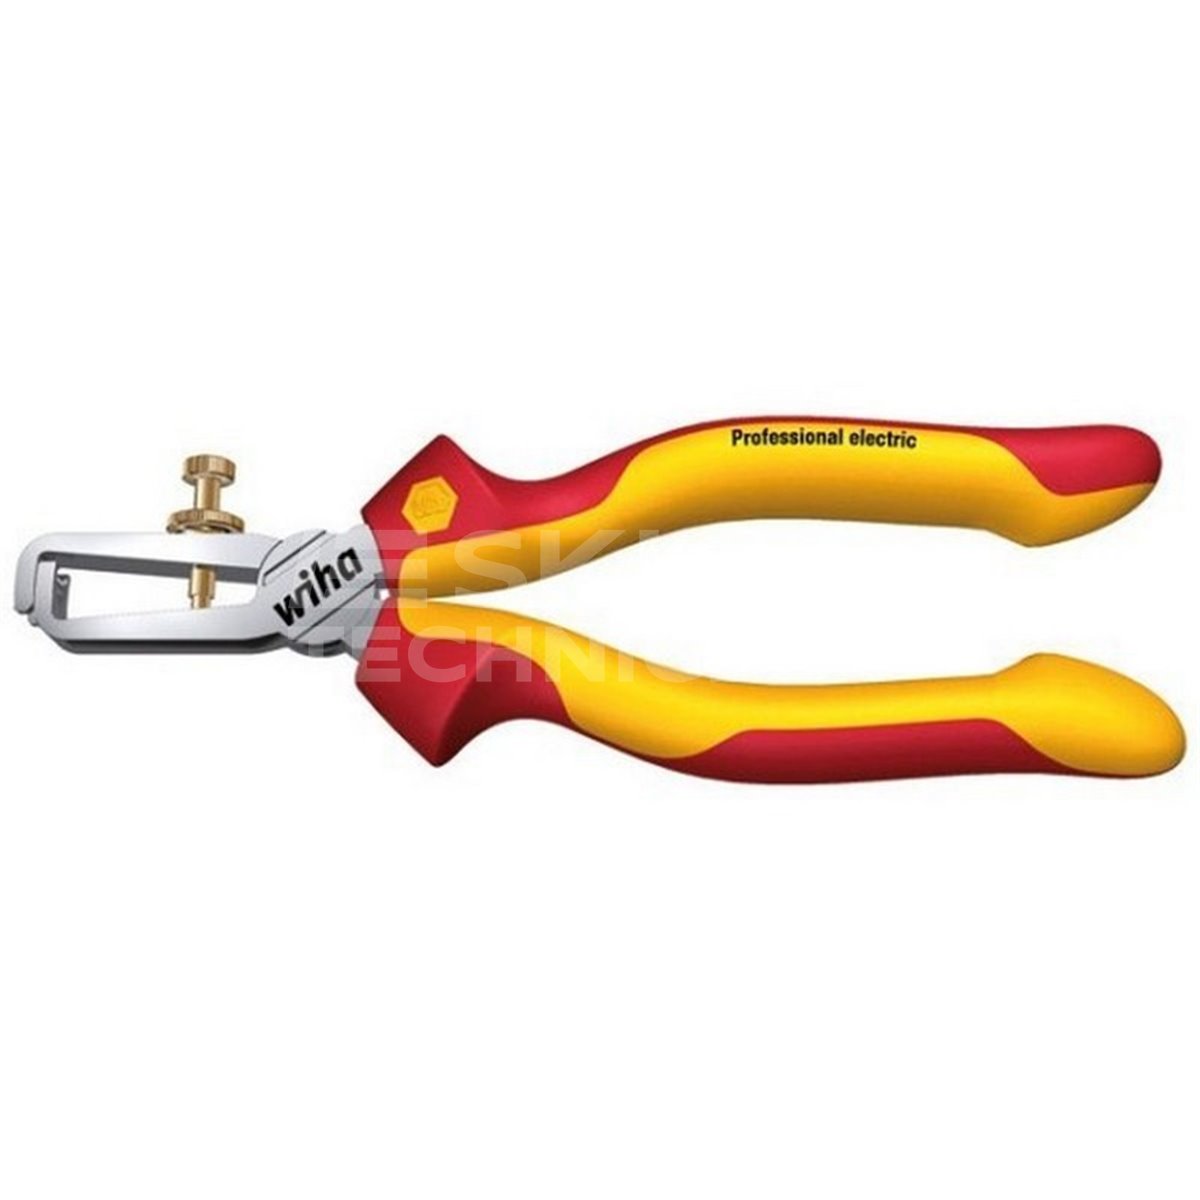 Professional Electric VDE Insulation Pliers 160mm Wiha 26847